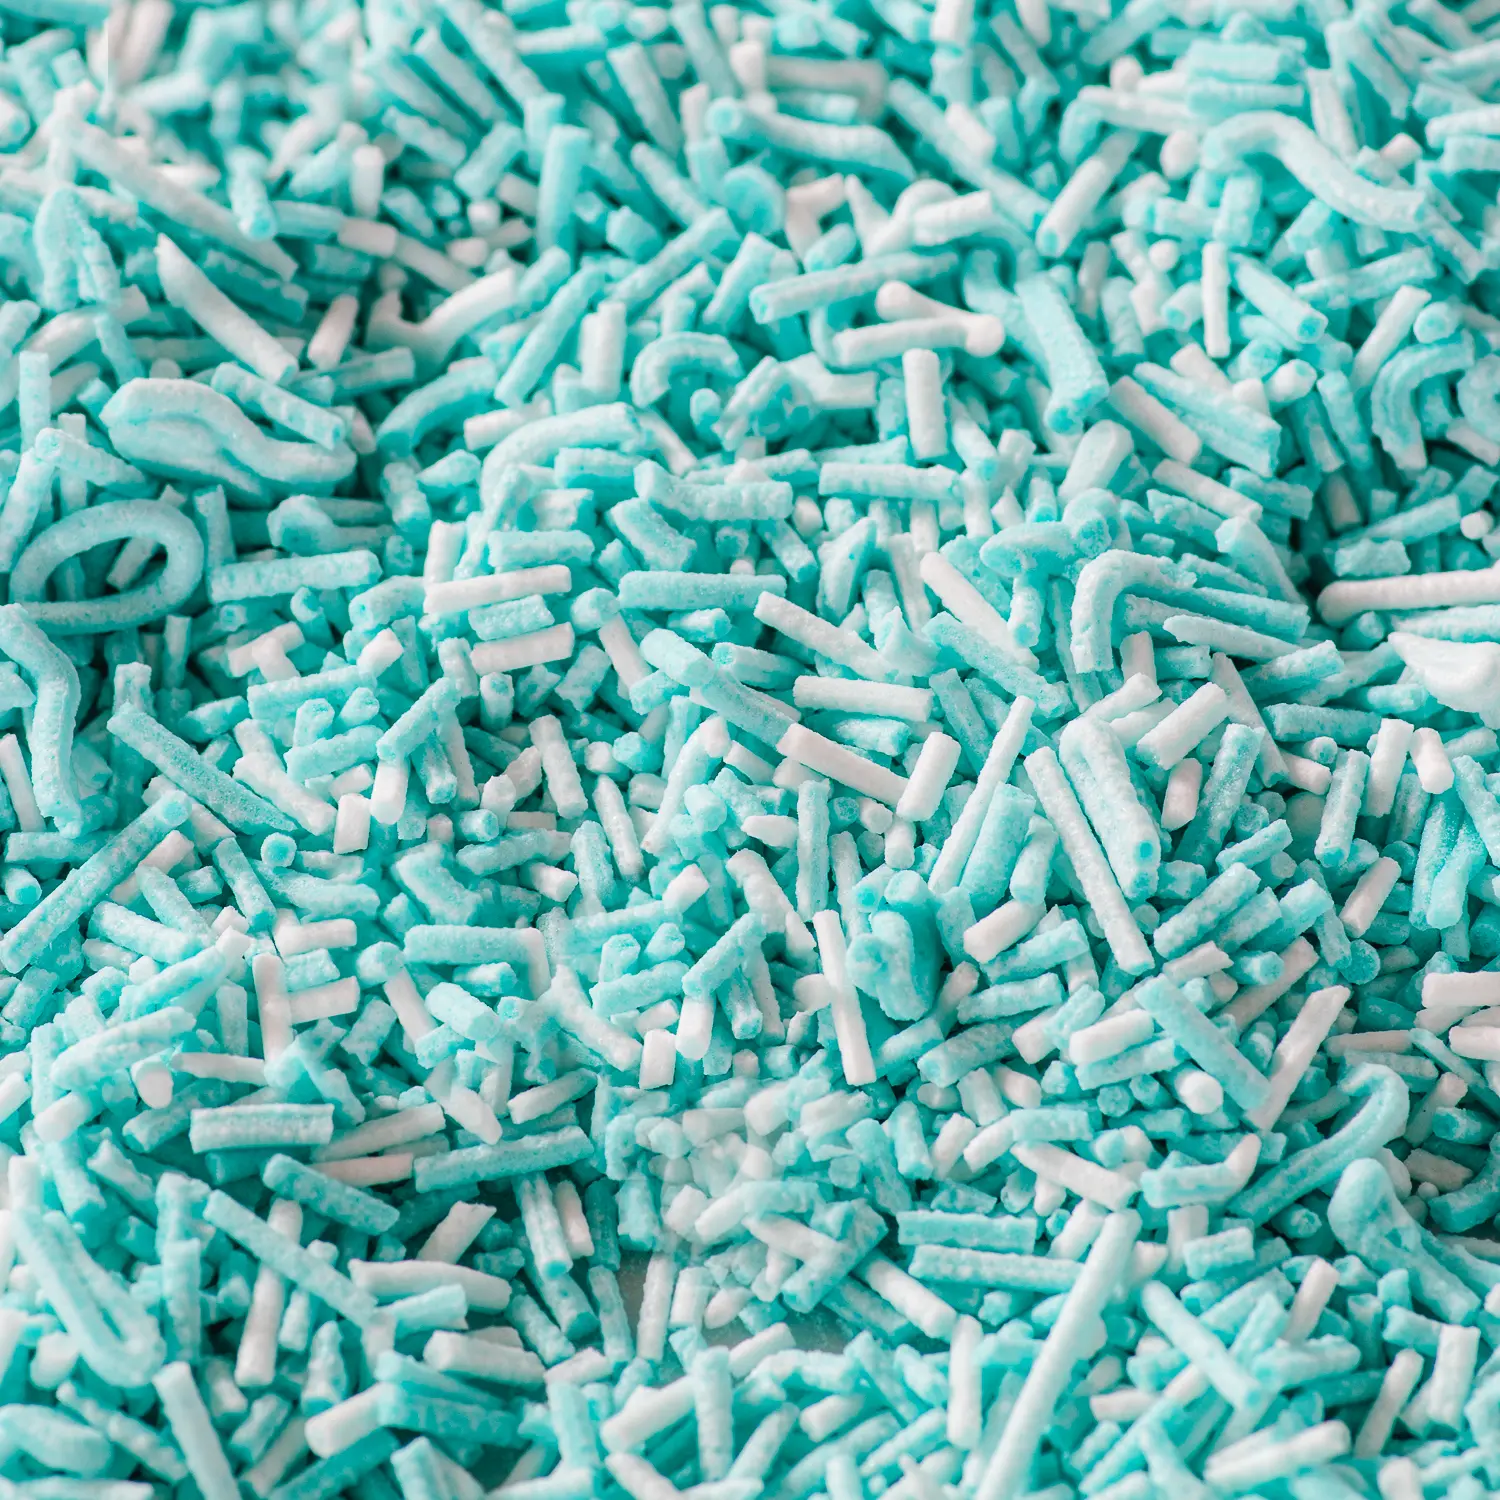 Magnified photo of blue and white sprinkles